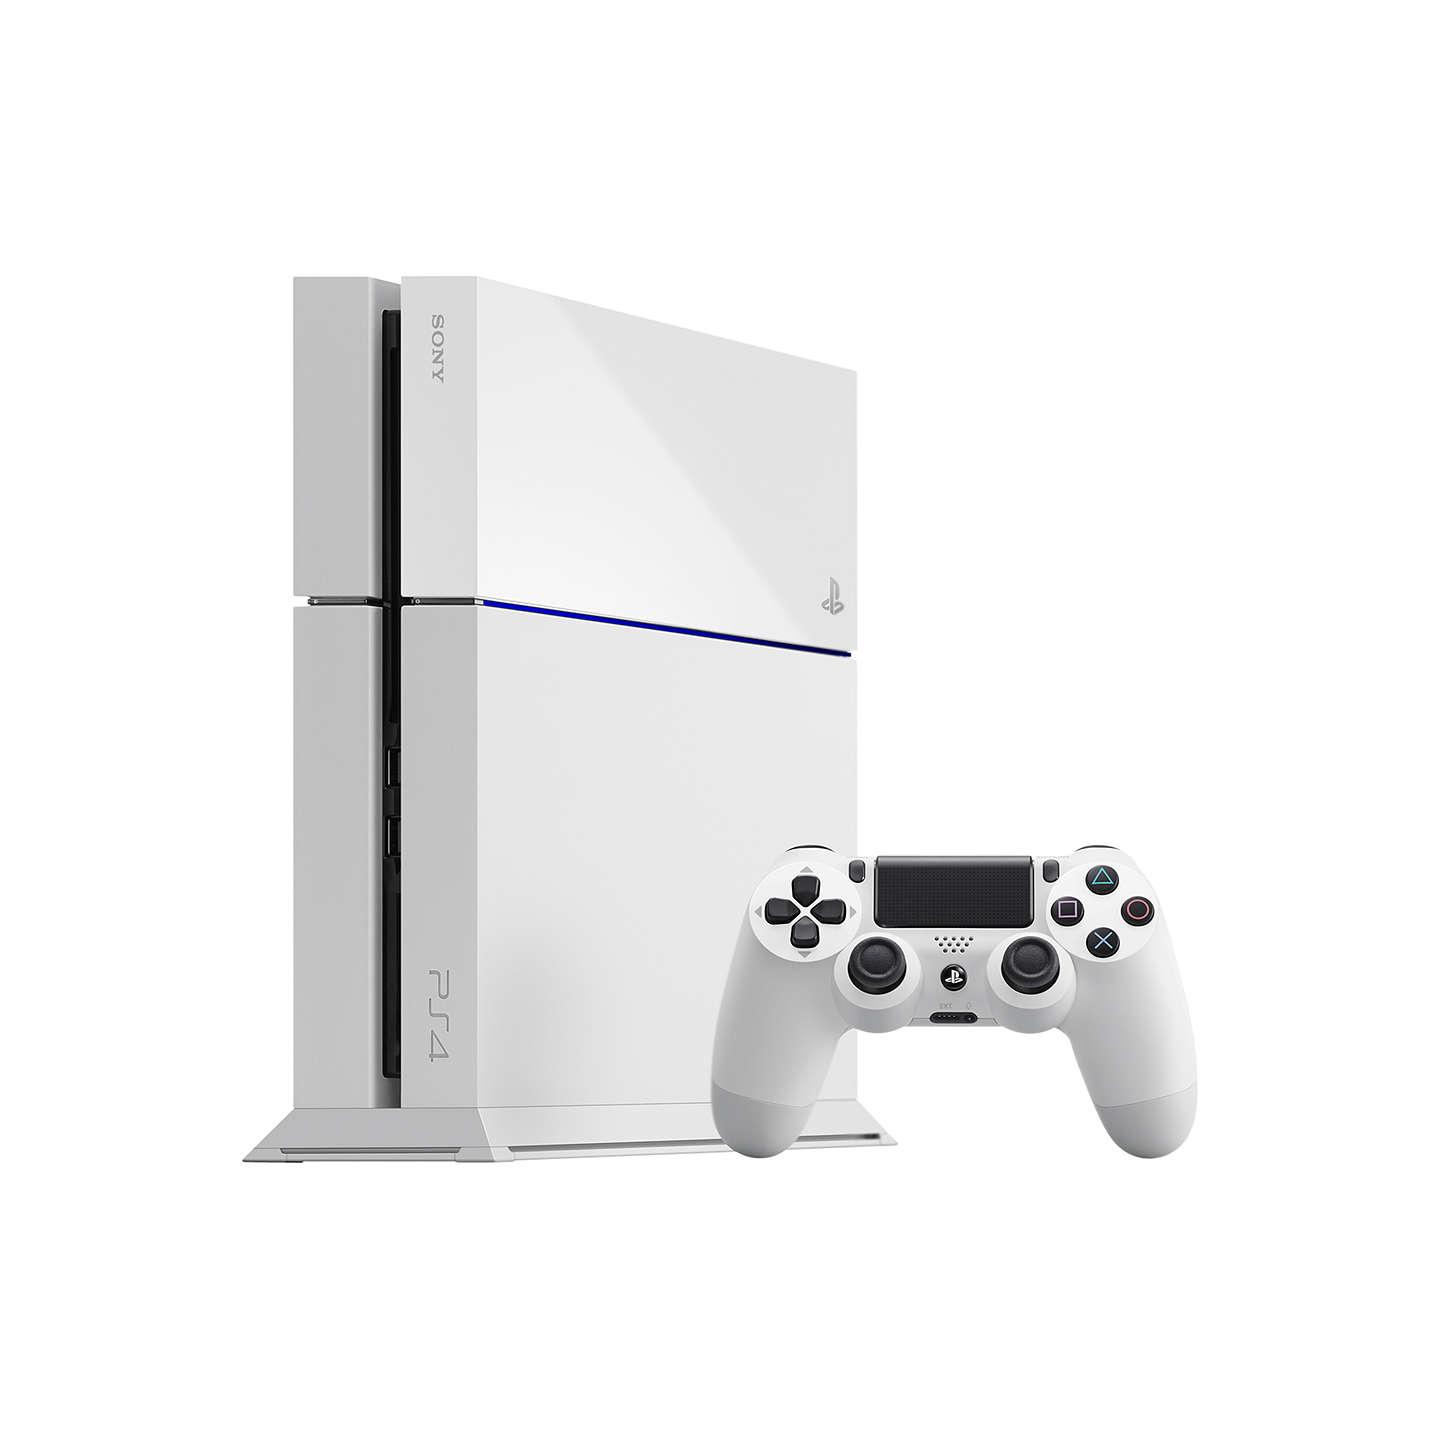 Sony PlayStation 4 Console, 500GB | White at John Lewis